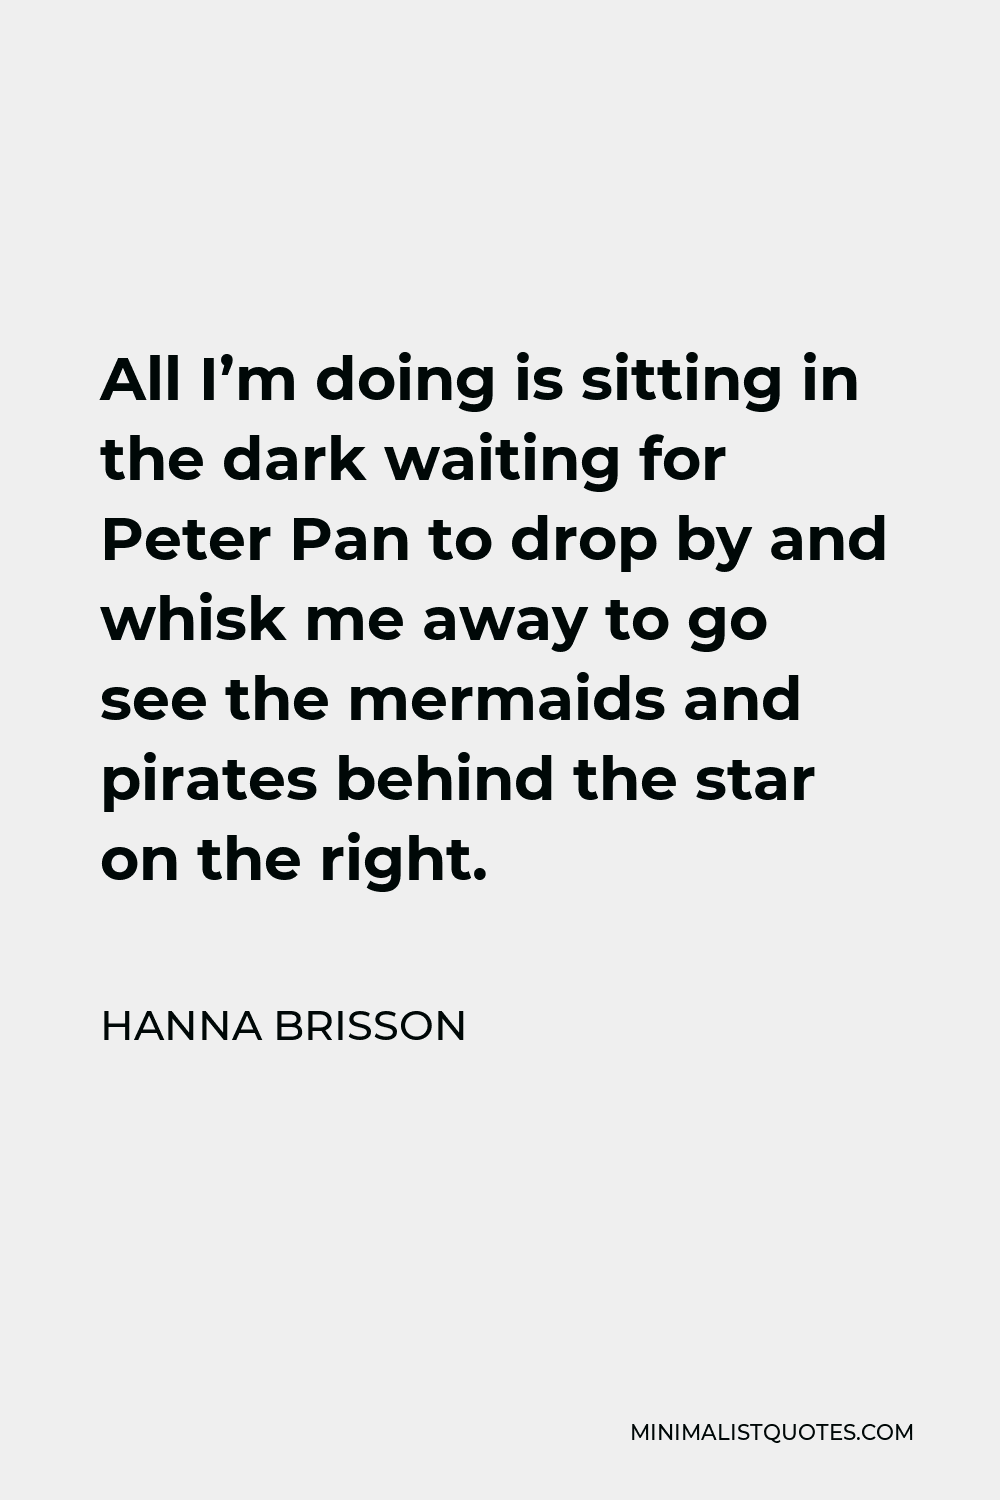 Hanna Brisson Quote - All I’m doing is sitting in the dark waiting for Peter Pan to drop by and whisk me away to go see the mermaids and pirates behind the star on the right.